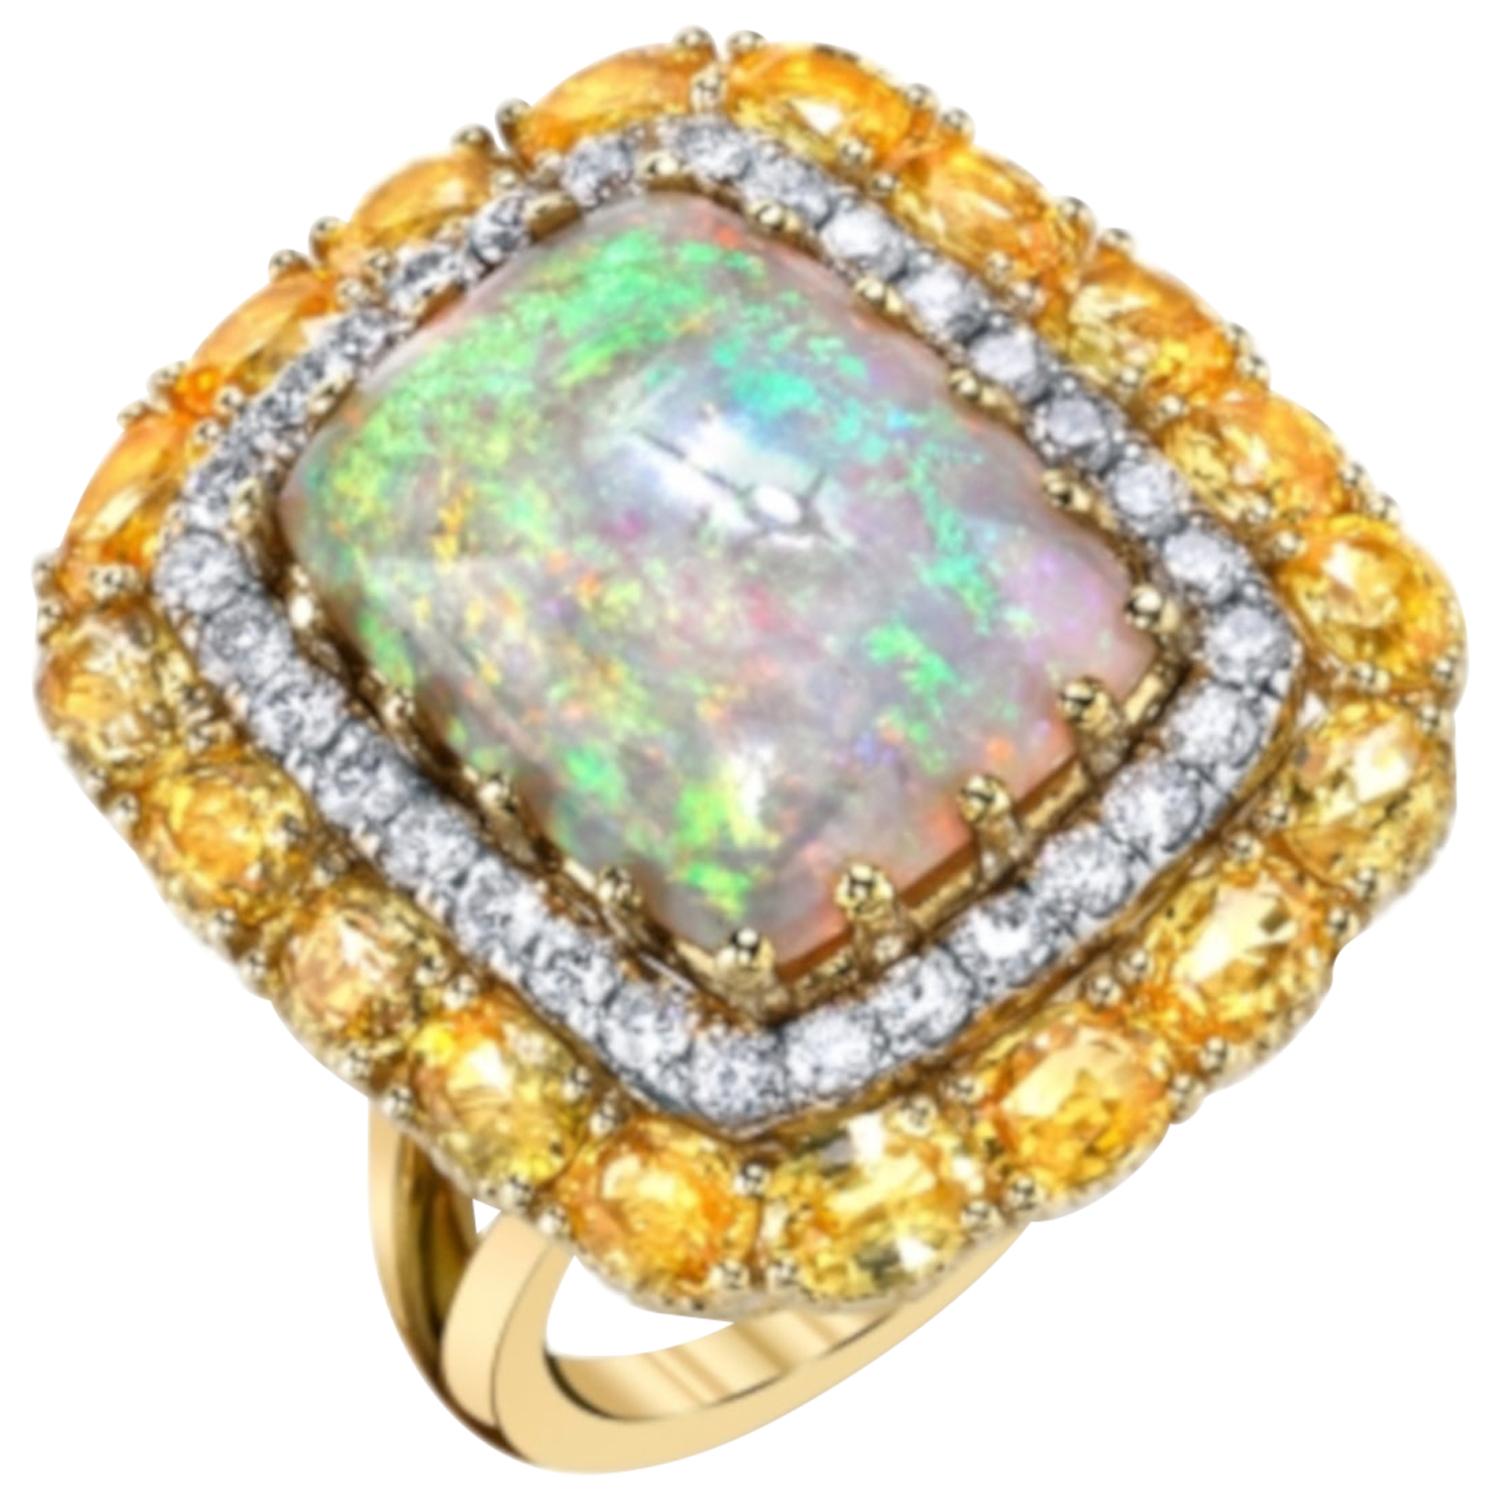 5.45 ct. Australian Opal, Yellow Sapphire and Diamond Cocktail Ring in 18k Gold